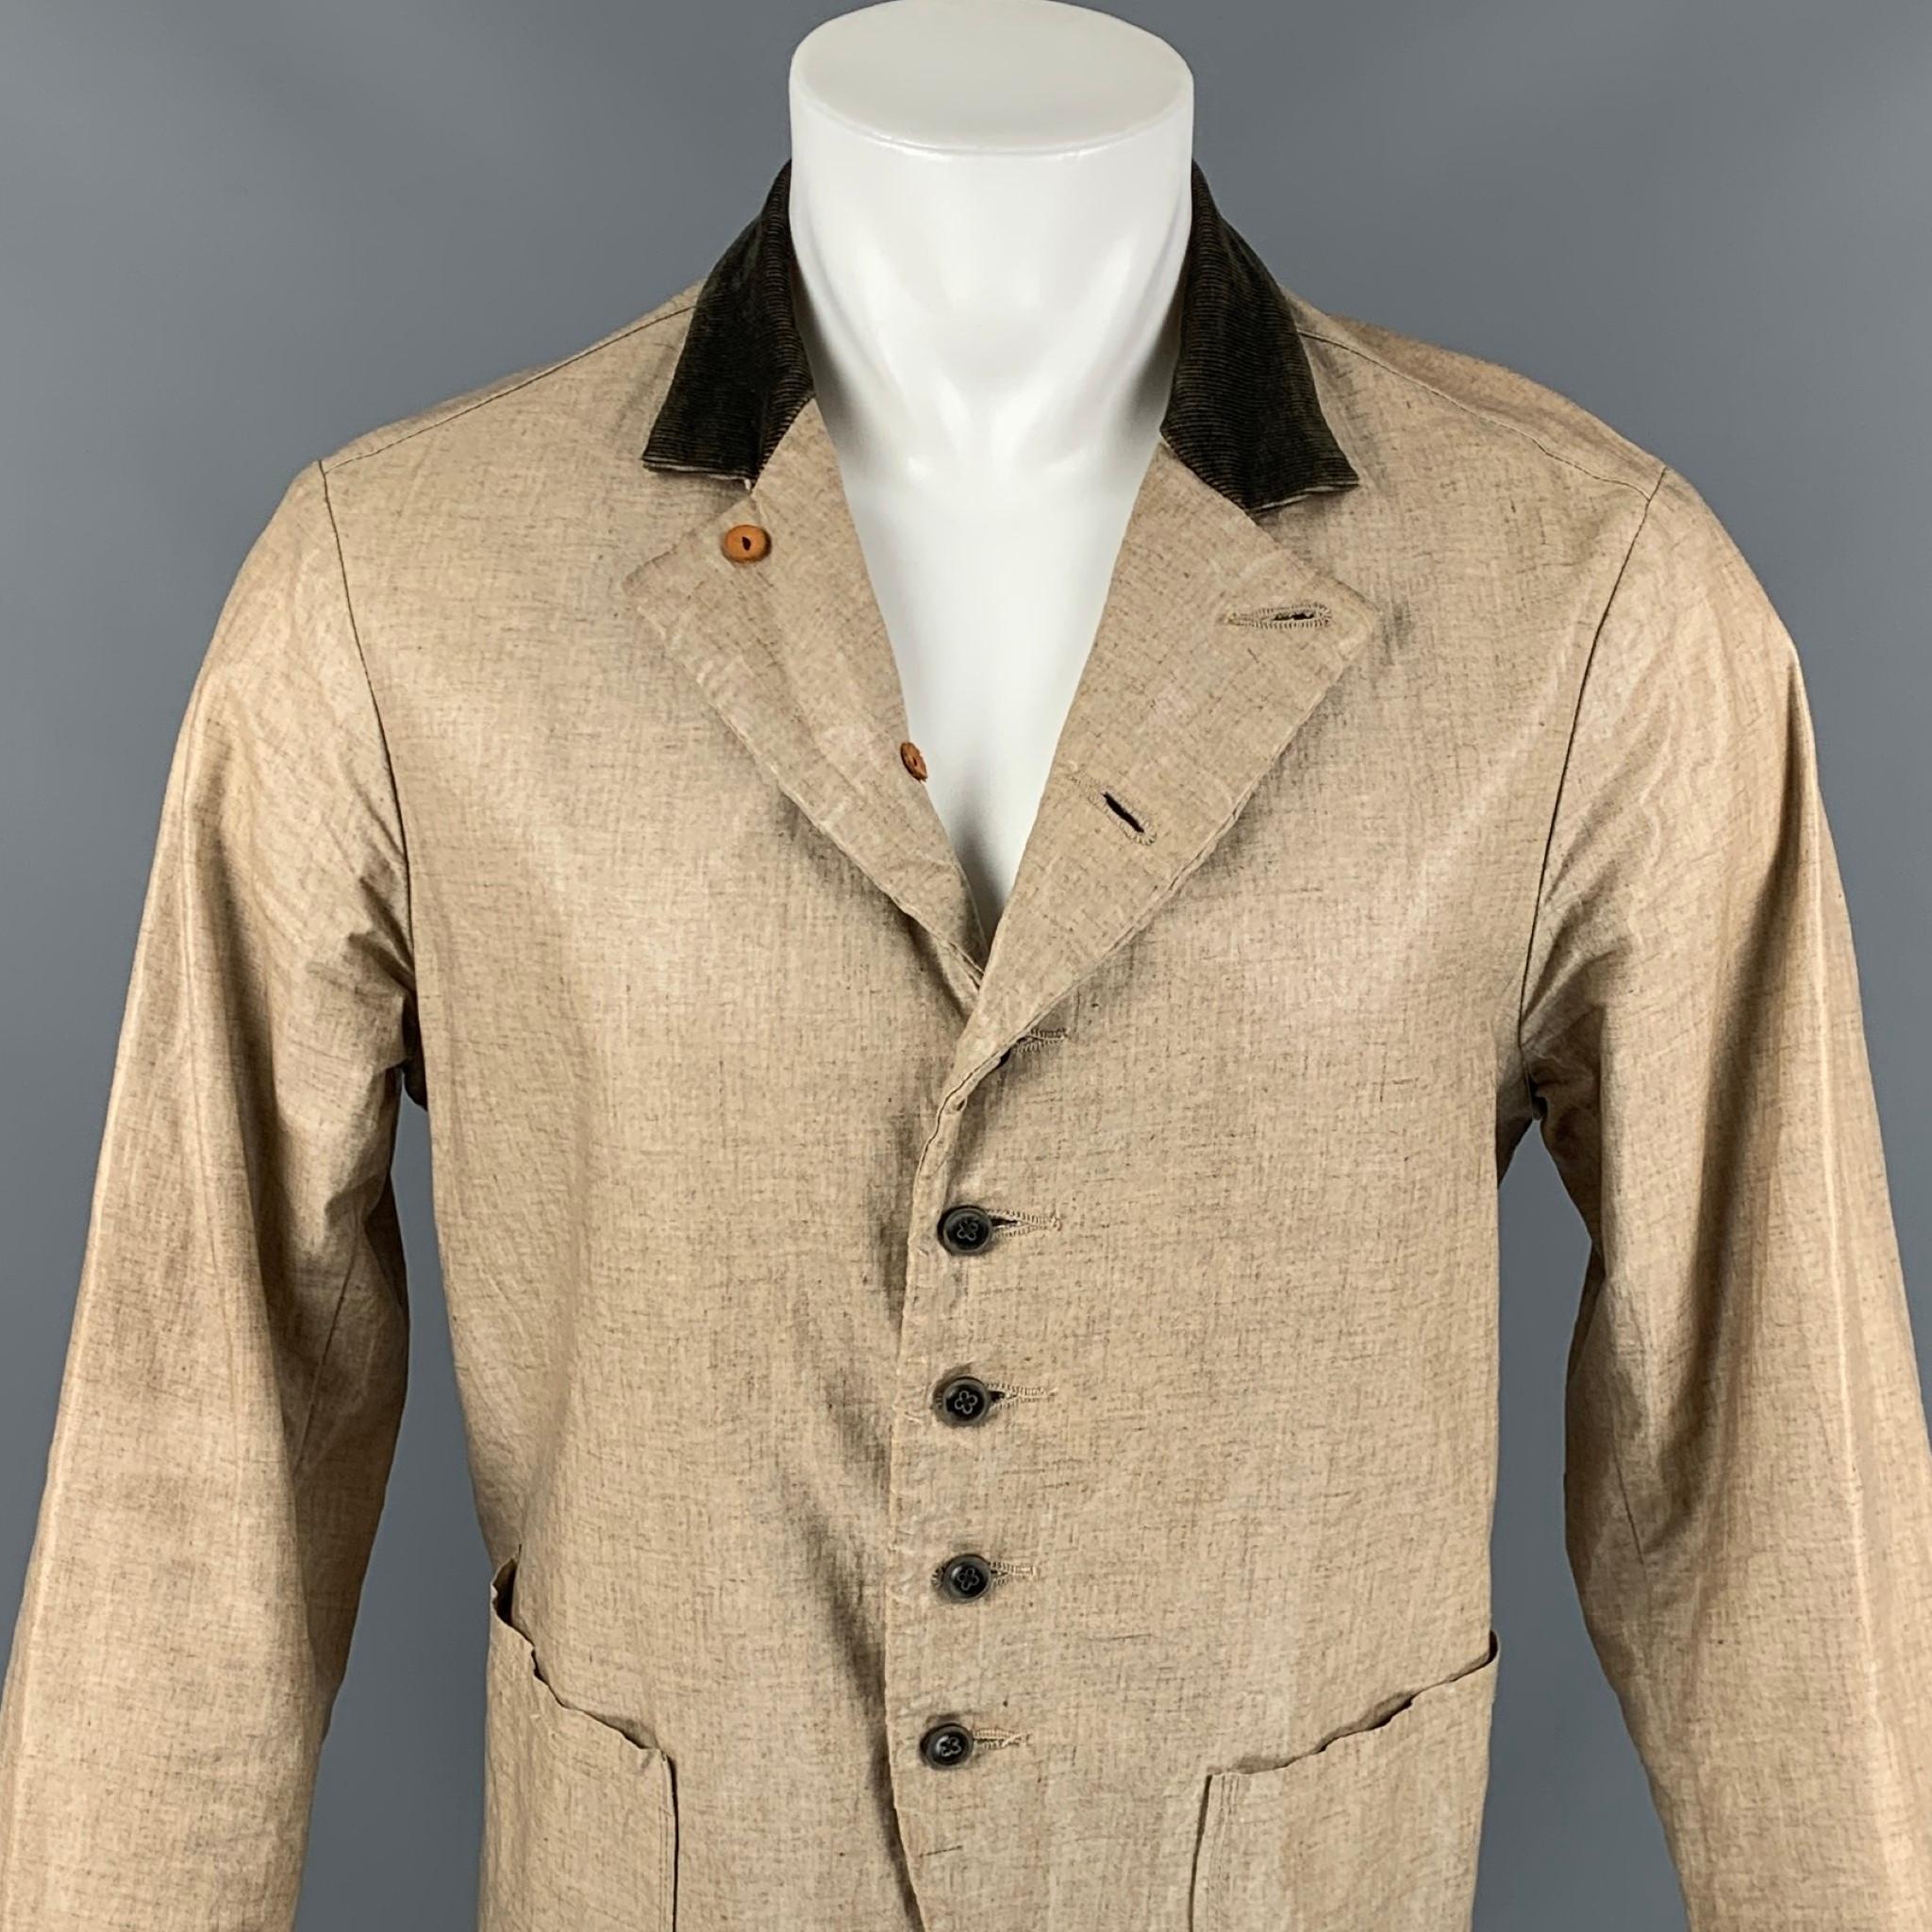 KAPITAL coat comes in a beige coated canvas featuring a corduroy collar, patch pockets, and a buttoned closure. Made in Japan. 

Very Good Pre-Owned Condition.
Marked: 3

Measurements:

Shoulder: 17.5 in.
Chest: 40 in.
Sleeve: 26 in.
Length: 26 in. 